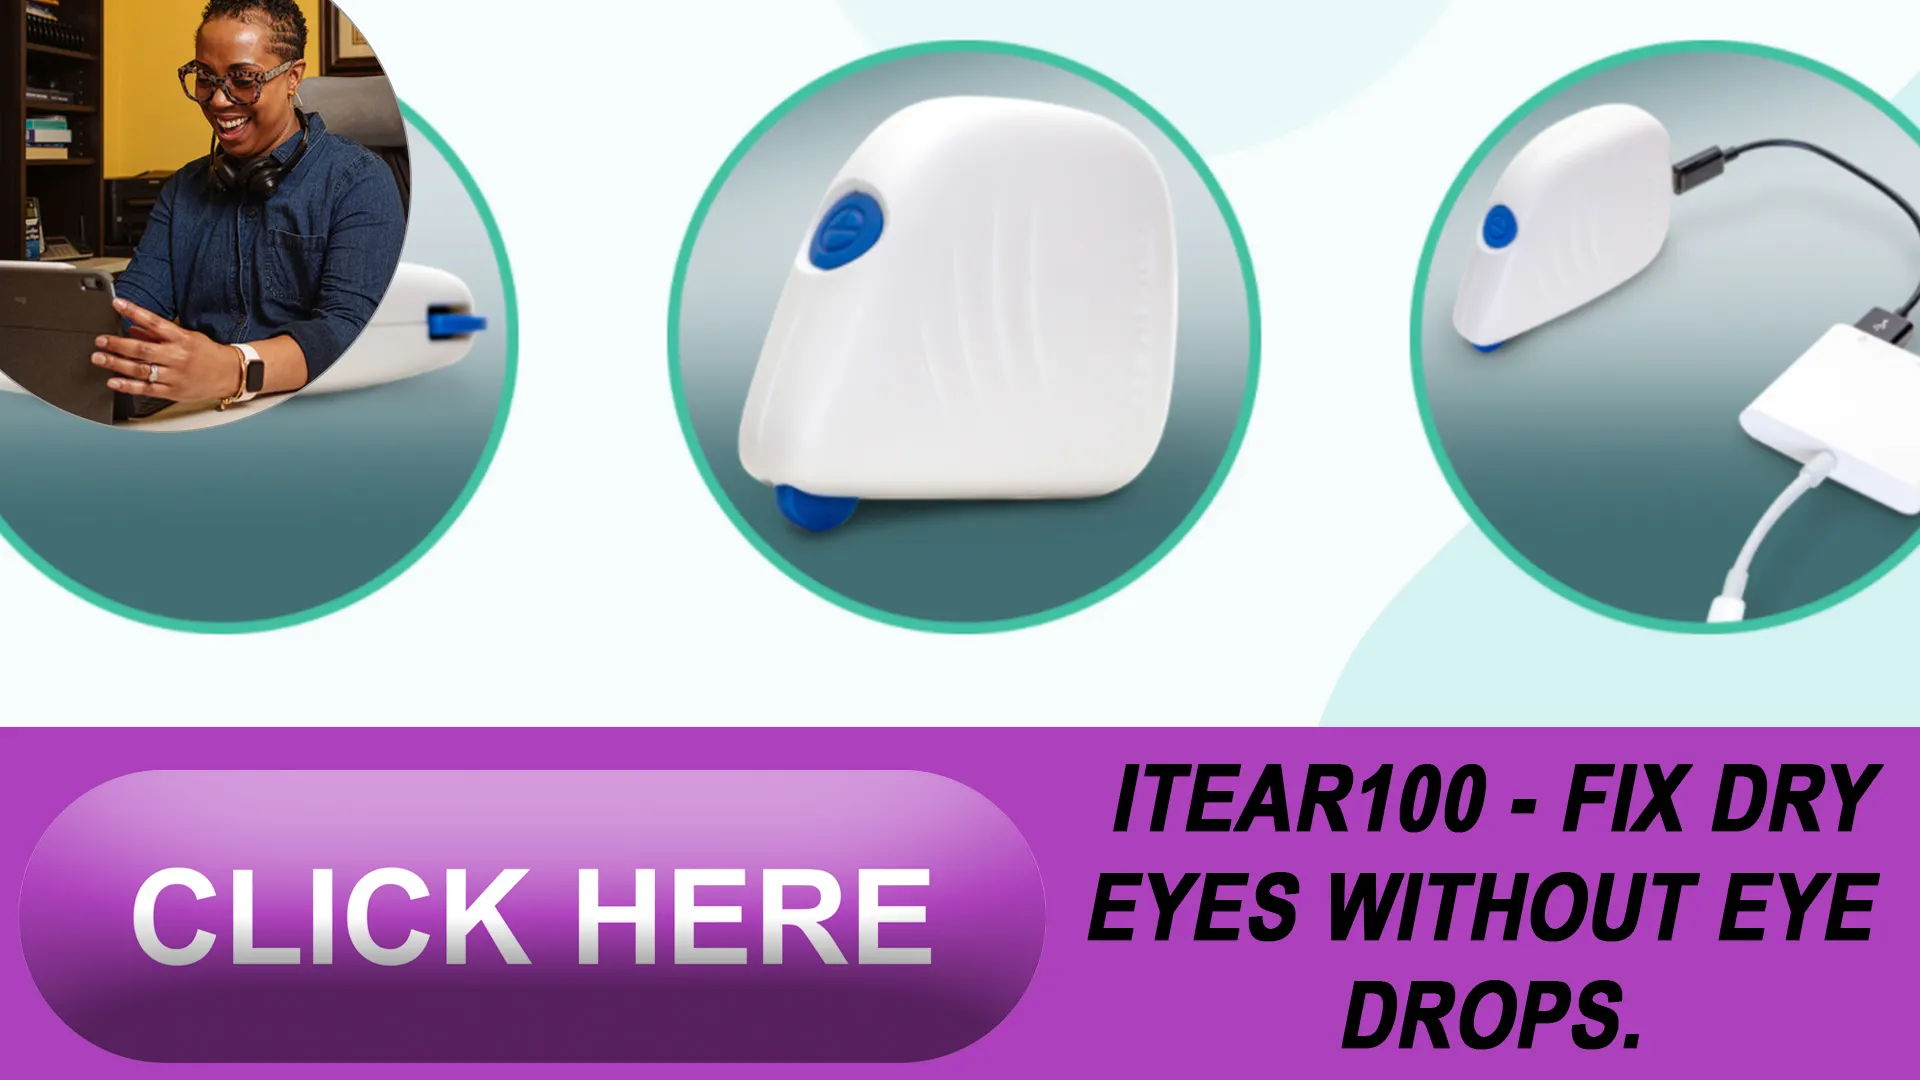 How to Integrate the iTEAR100 into Daily Life